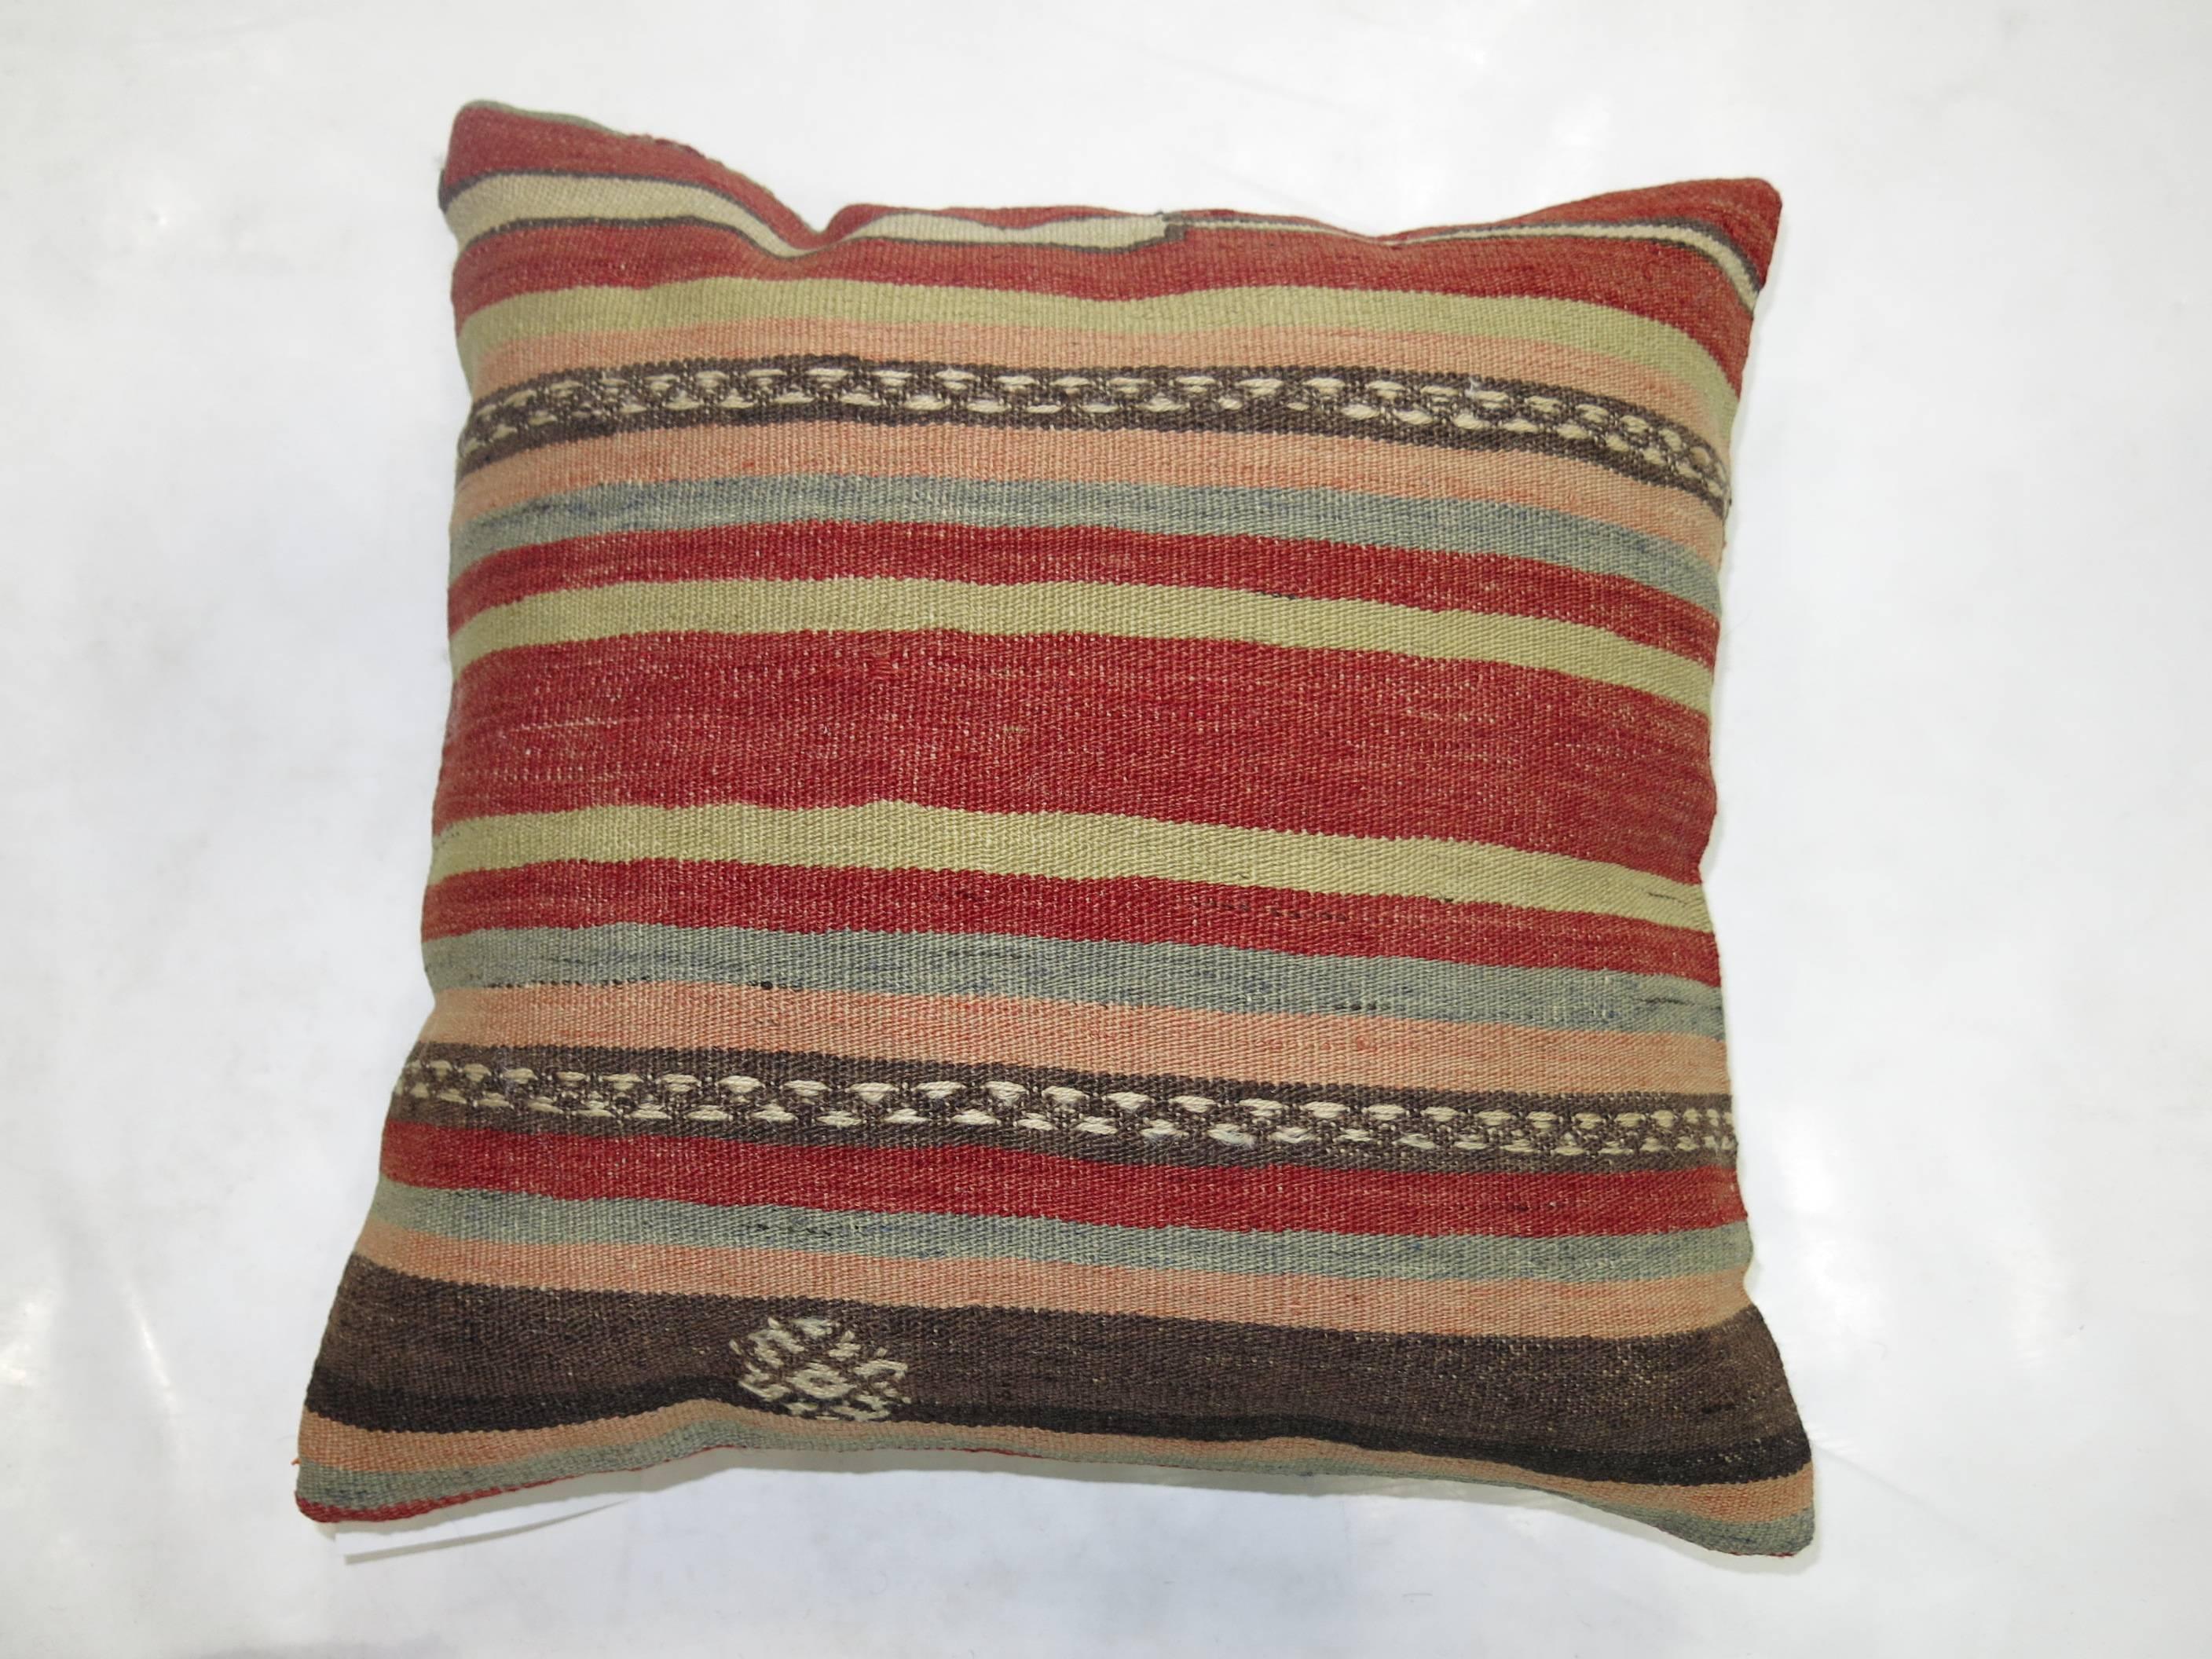 Pillow made from a vintage Turkish Kilim 